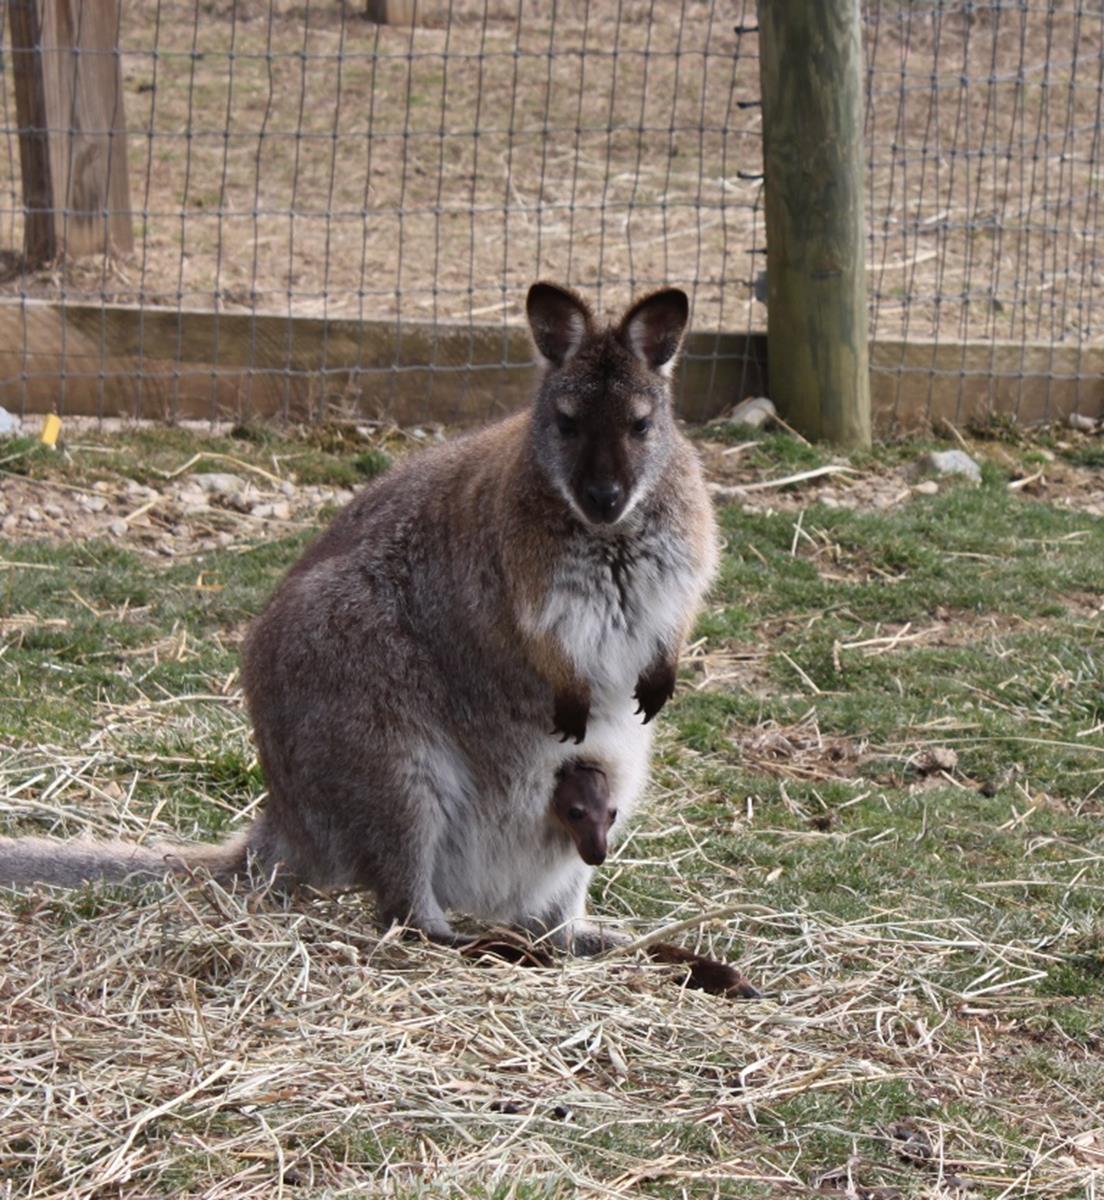 Horsefeathers Farm wallaby in pouch. Credit: Visit Clinton County